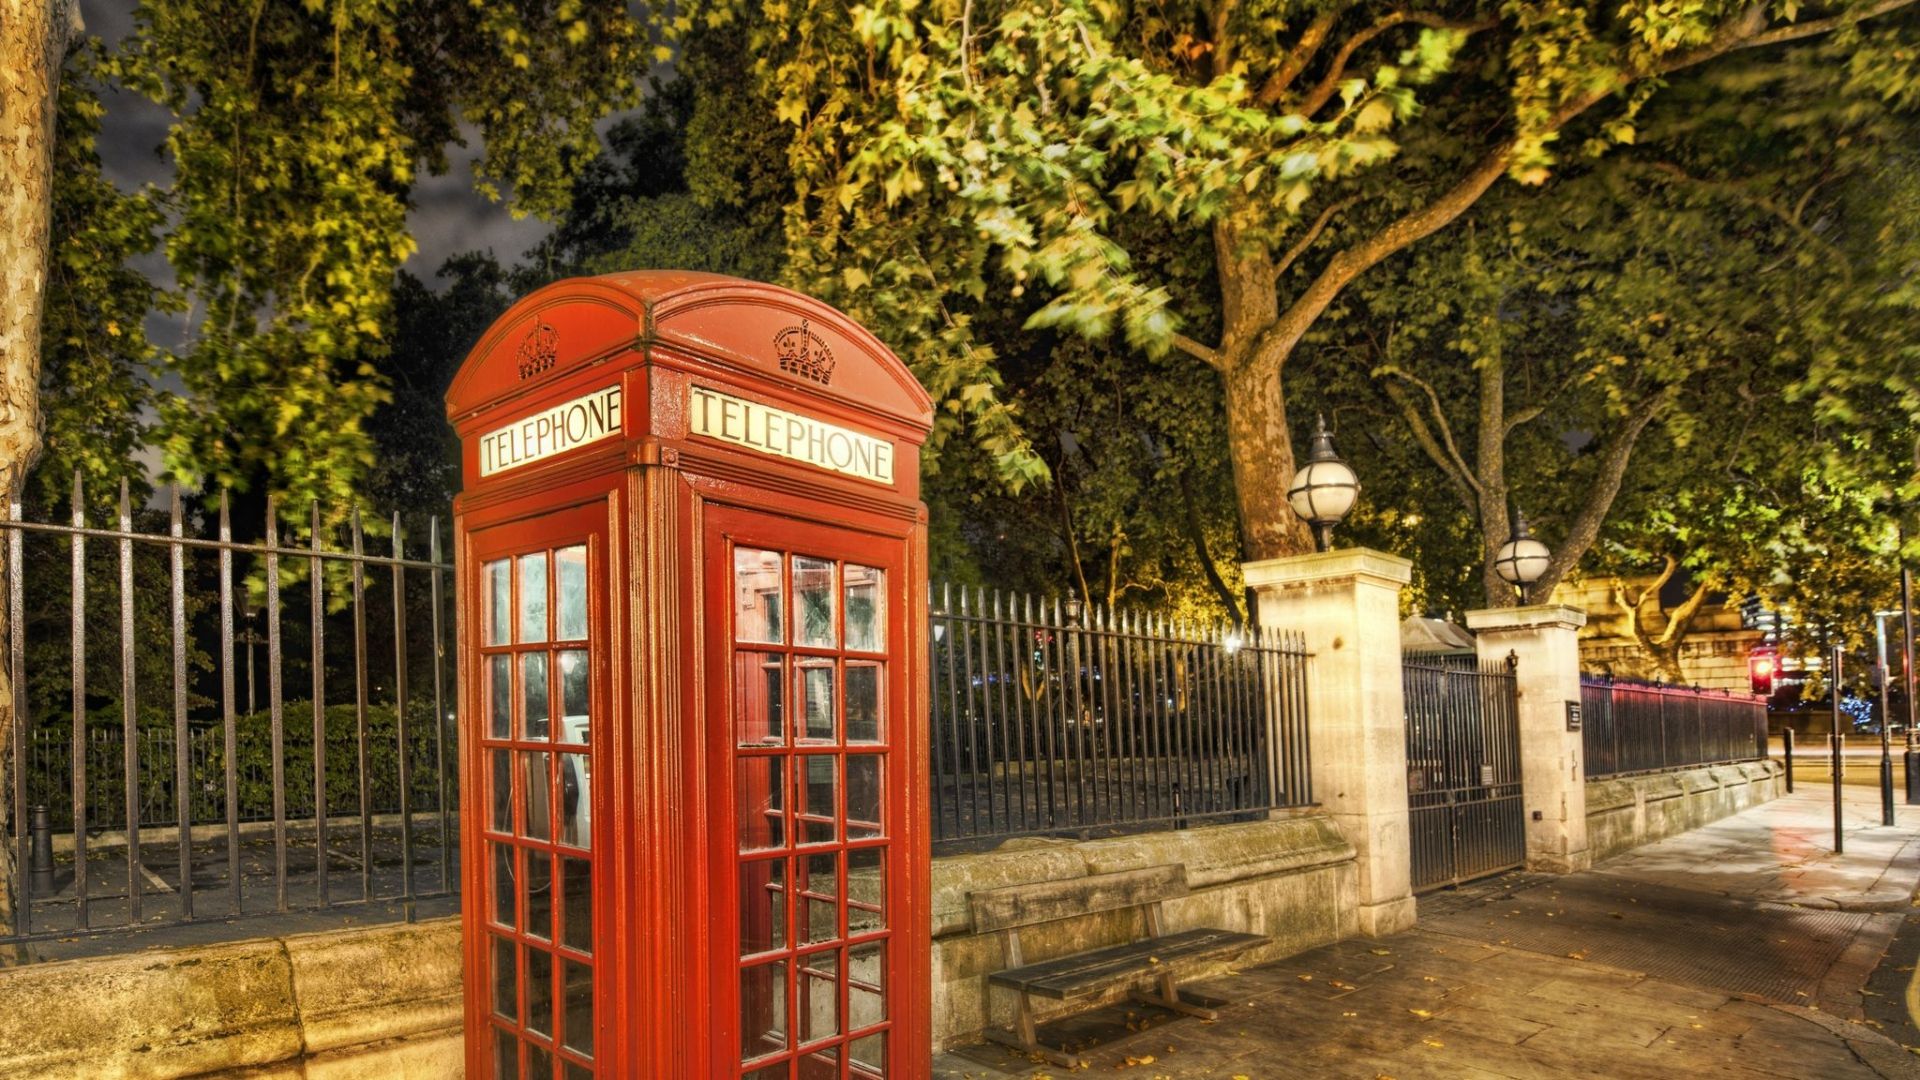 wallpaper for mens phone,telephone booth,payphone,red,public space,outdoor structure